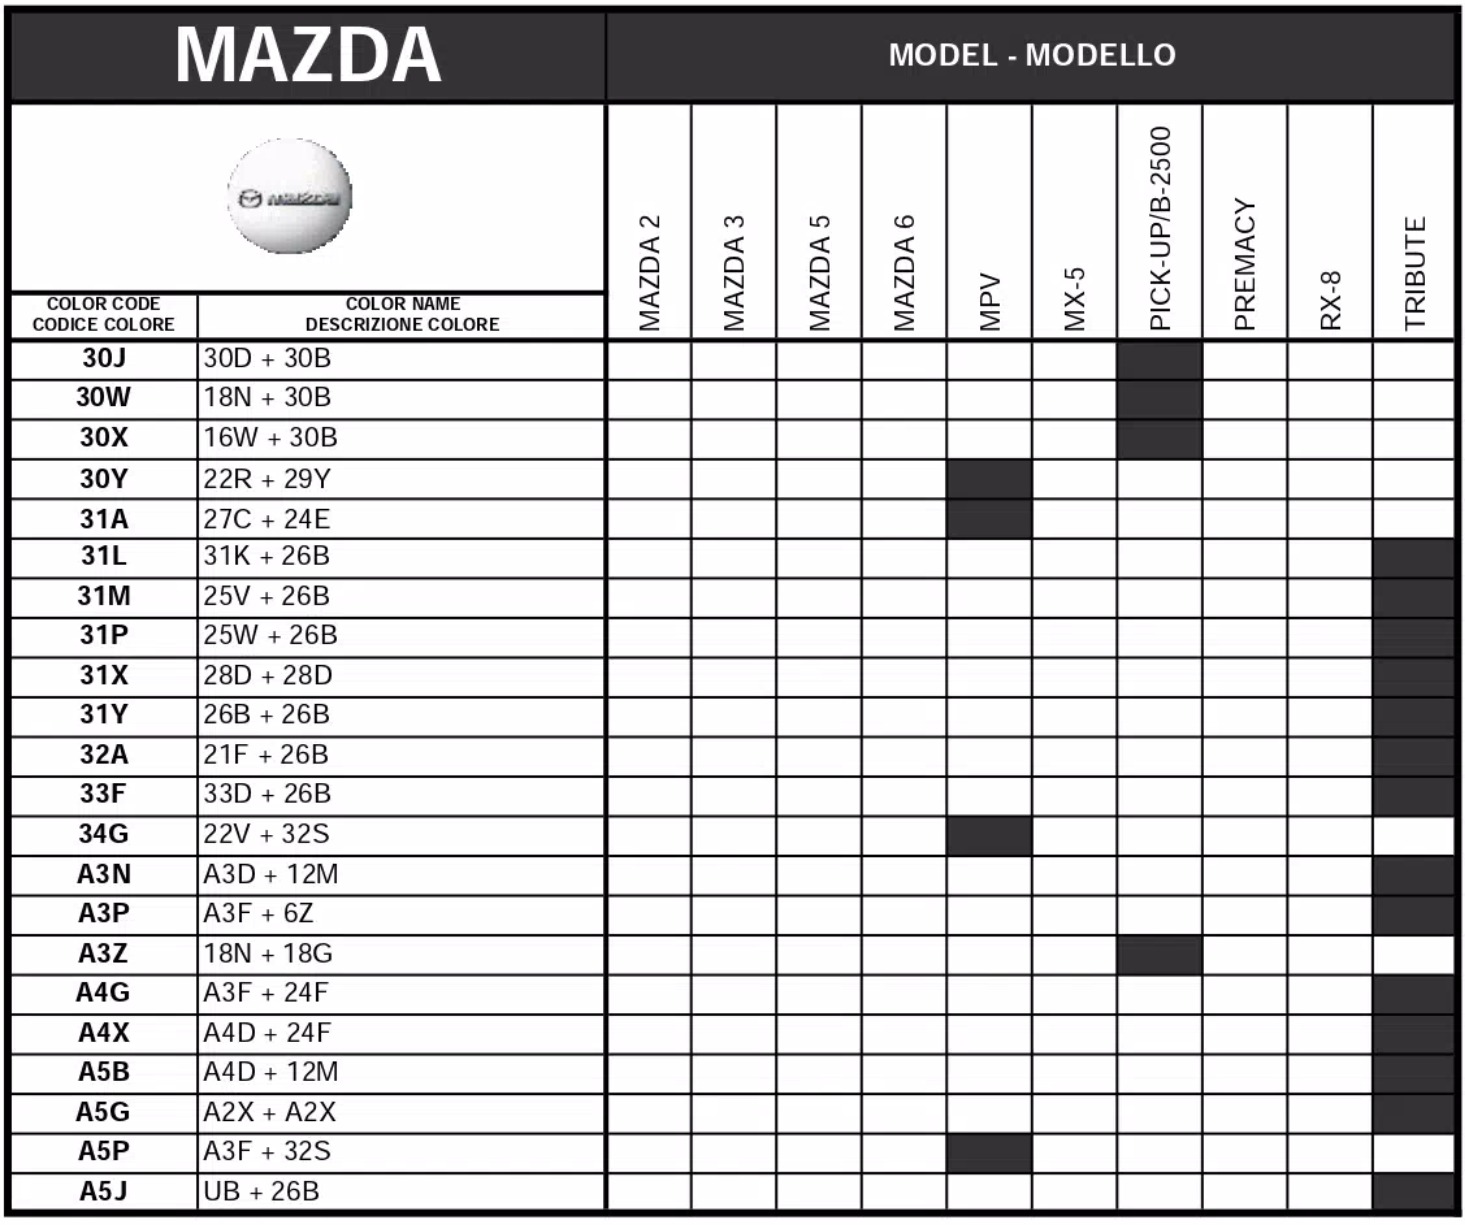 A chart showing what paint codes and their color names go to which vehicle for Mazda automobiles in 2007